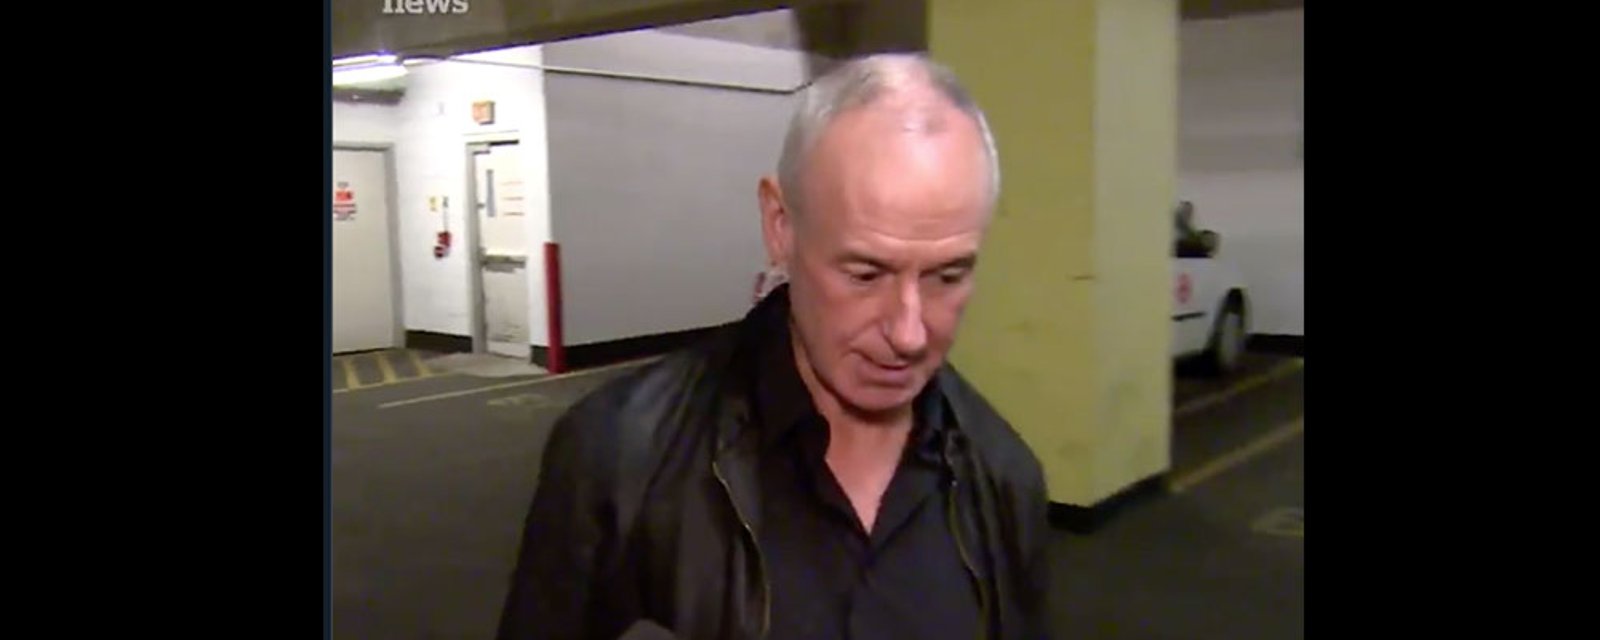 Ron MacLean speaks candidly on camera for the first time since Don Cherry’s firing